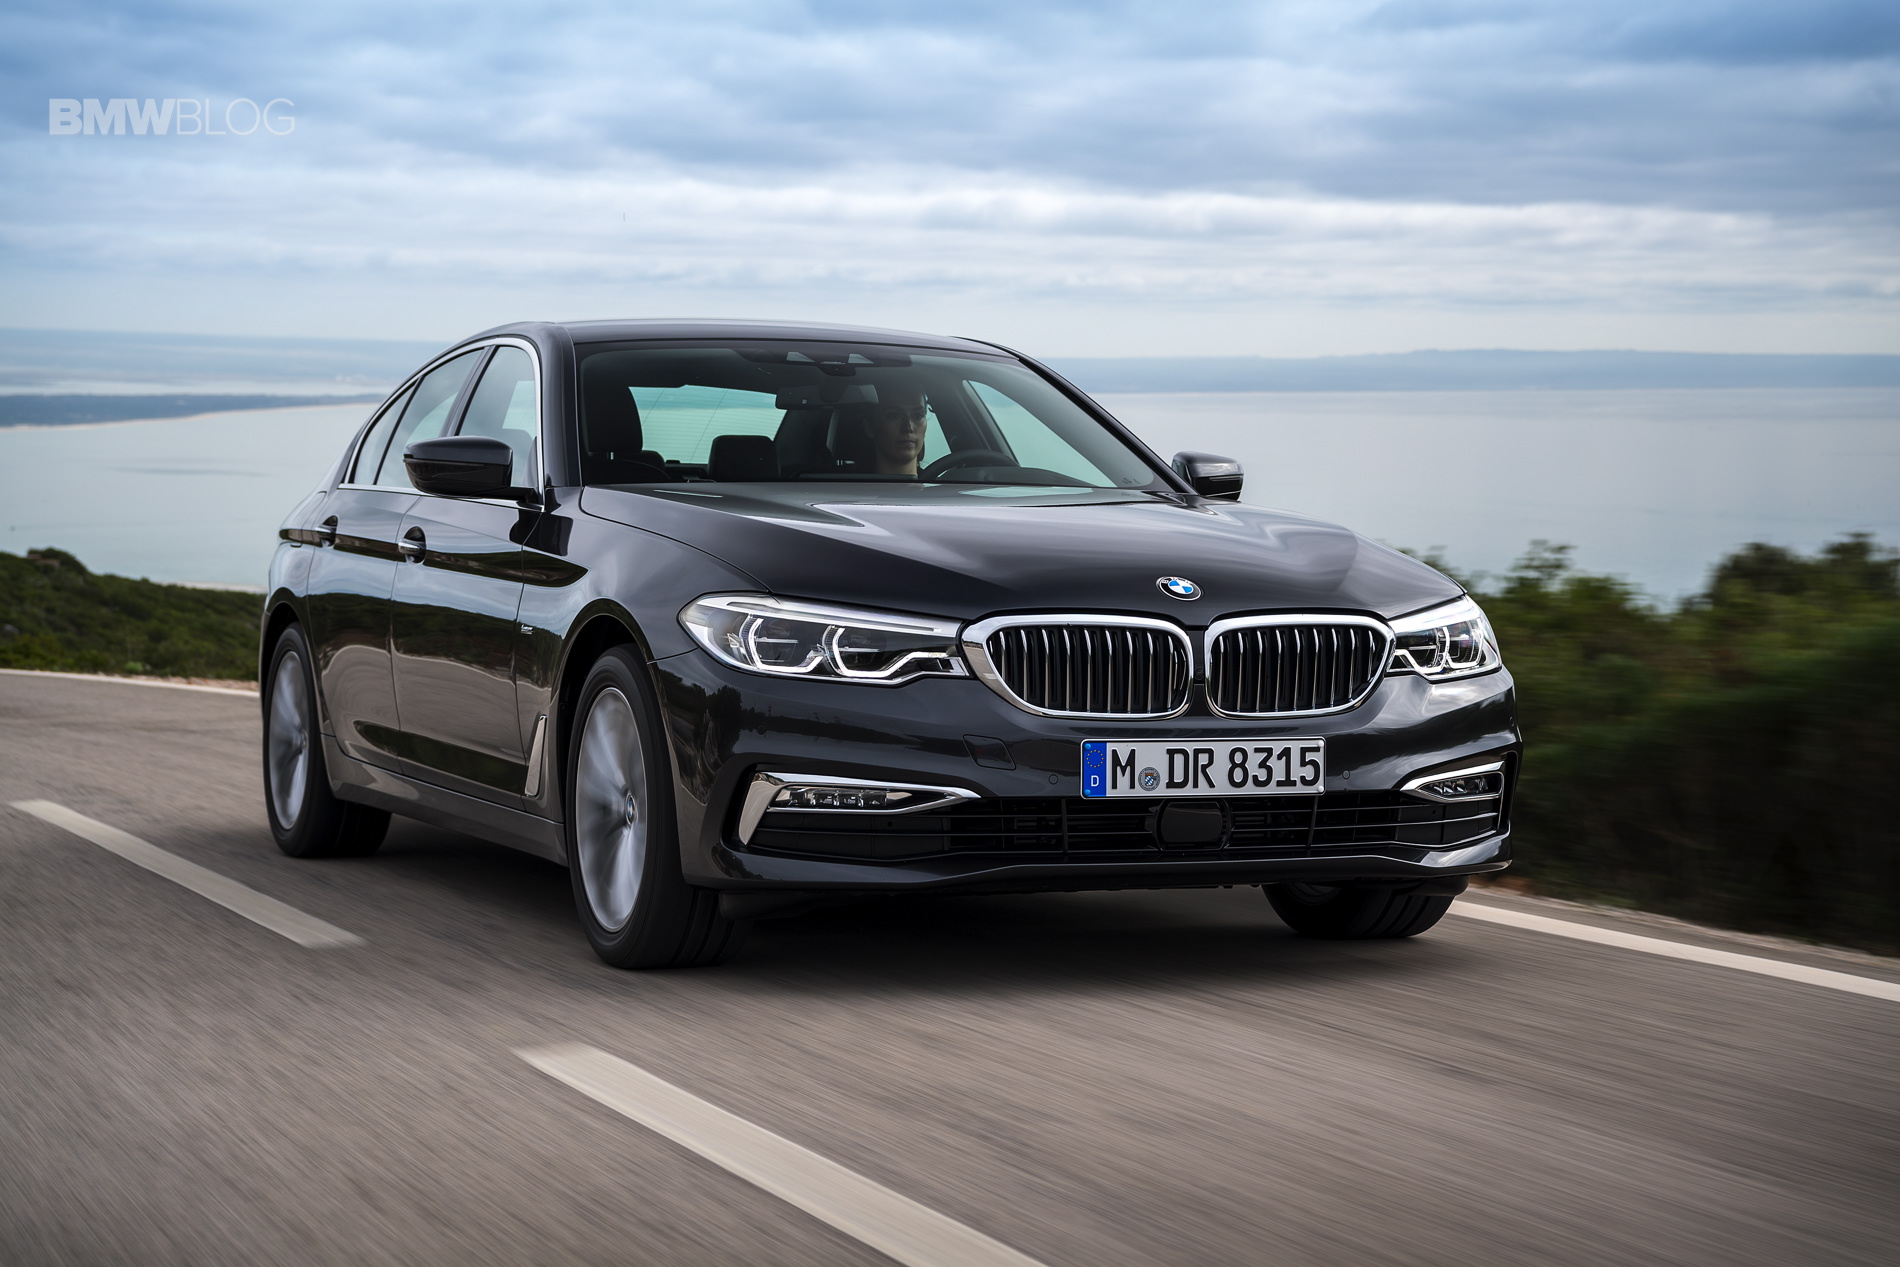 The new BMW 540d xDrive might be my favorite all-around American Bimmer